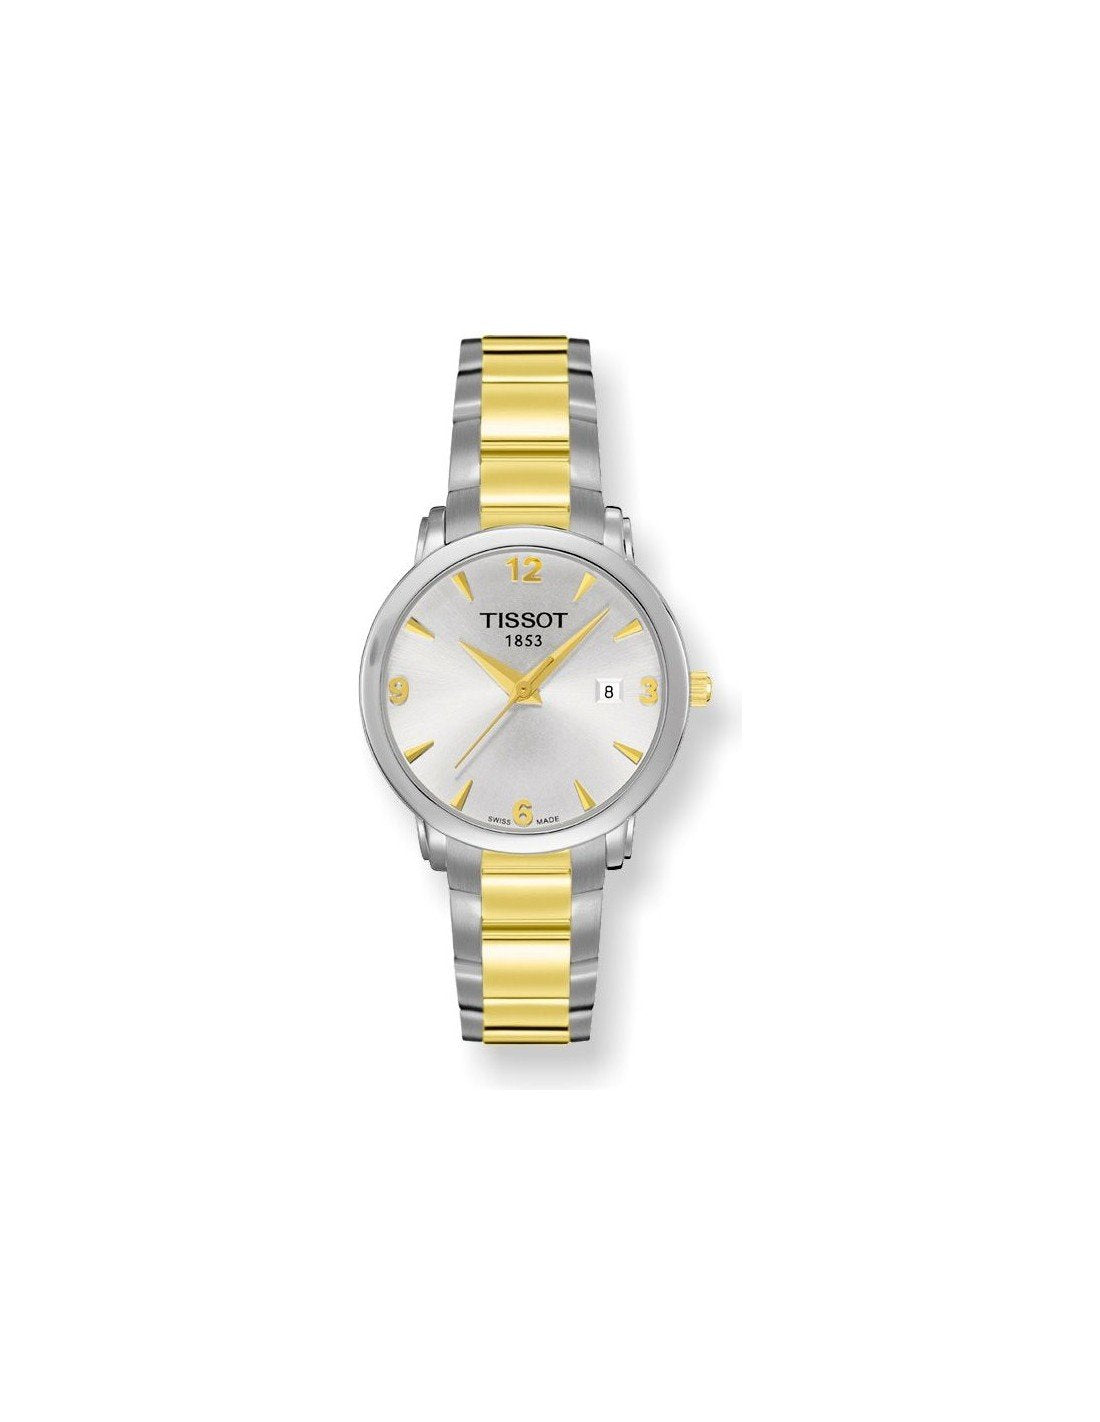 Tissot Swiss Made T-Classic Everytime 2 Tone Gold Plated Ladies' Watch T0572102203700 - Prestige